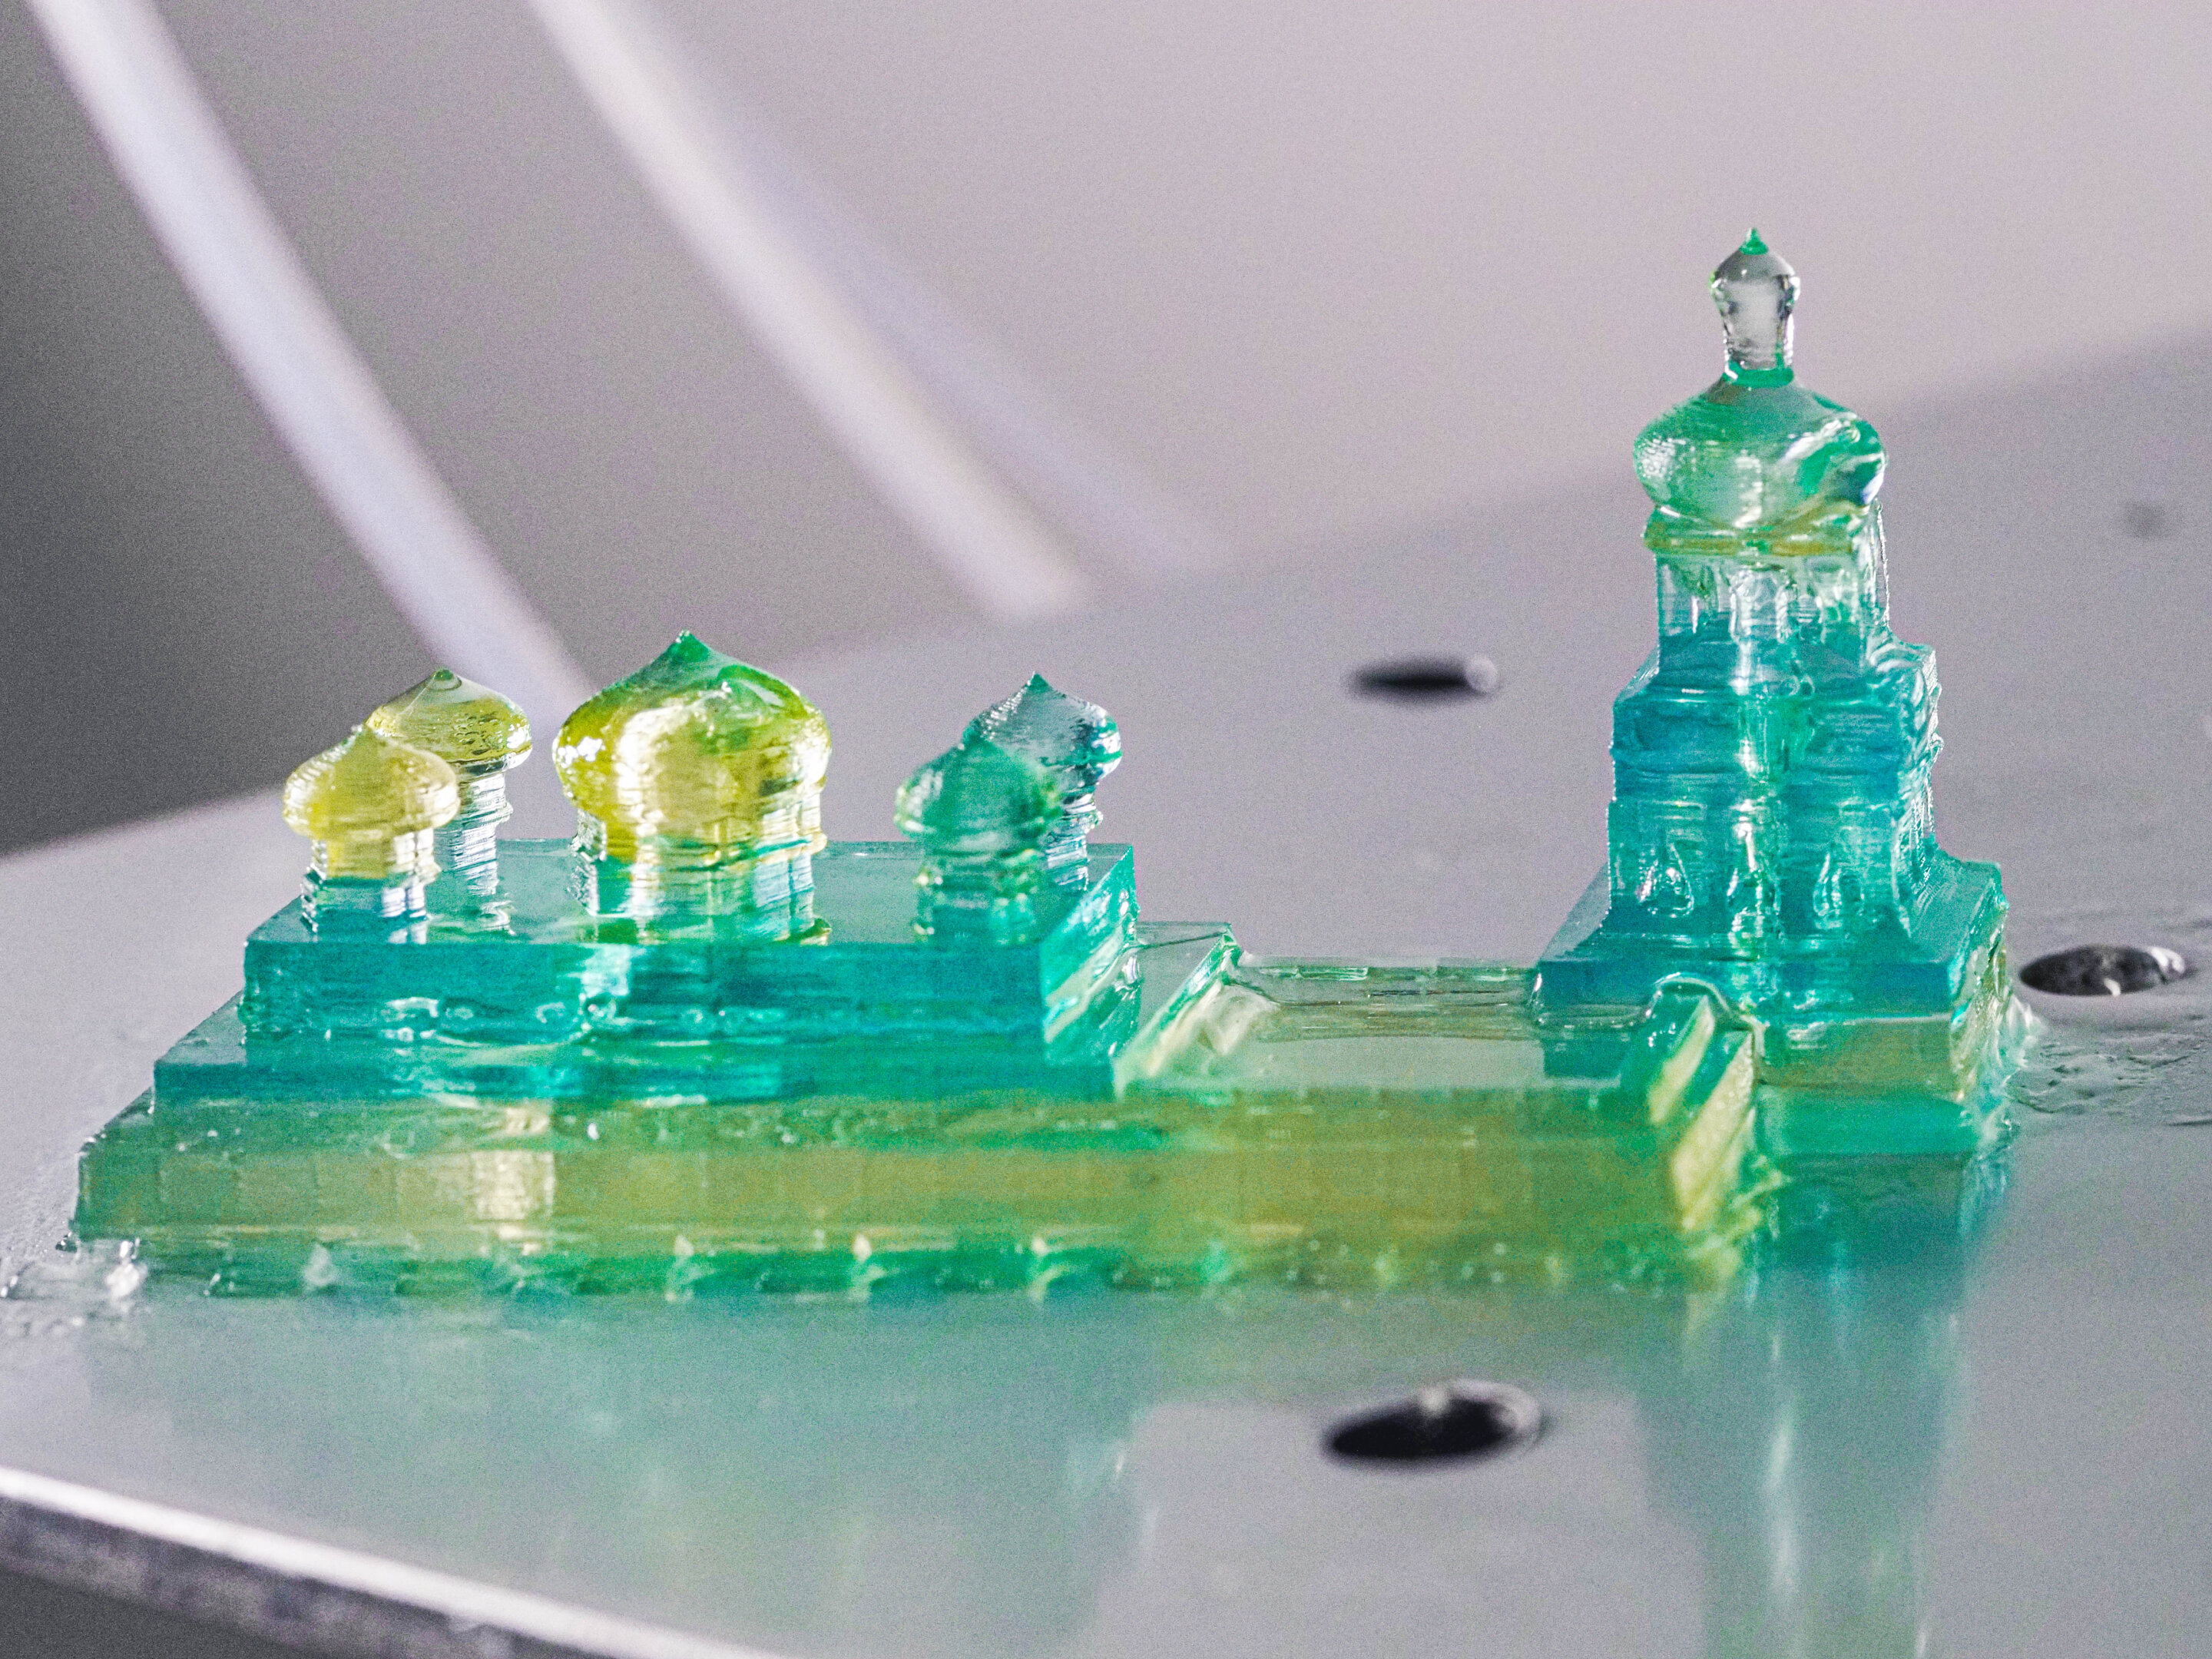 New 3D printing method designed by Stanford engineers promises faster printing with multiple materials